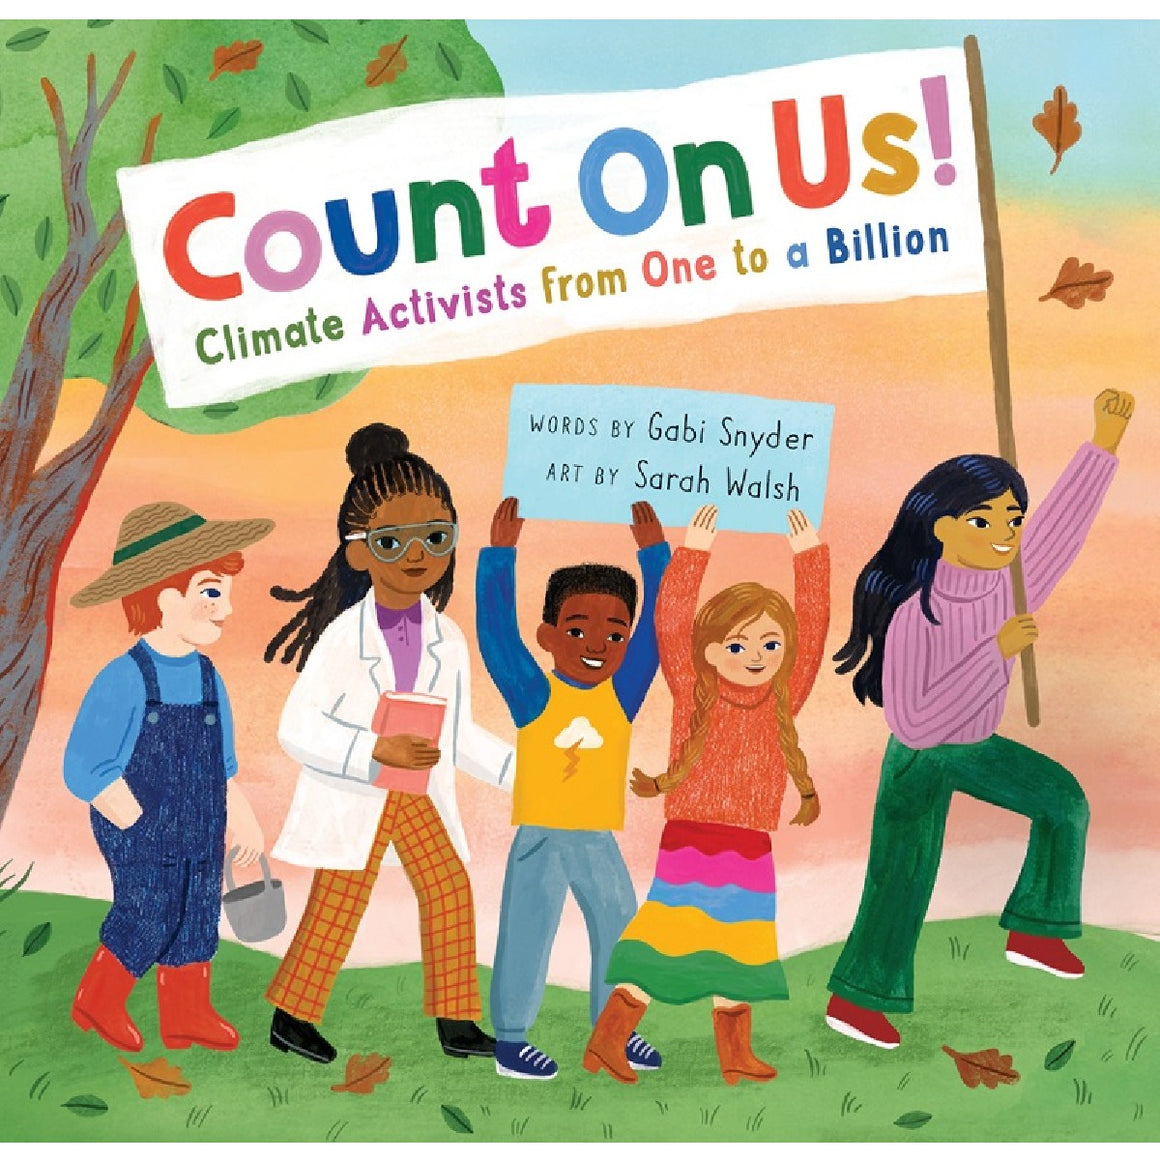 Count on Us!: Climate Activists from One to a Billion | Author: Gabi Snyder